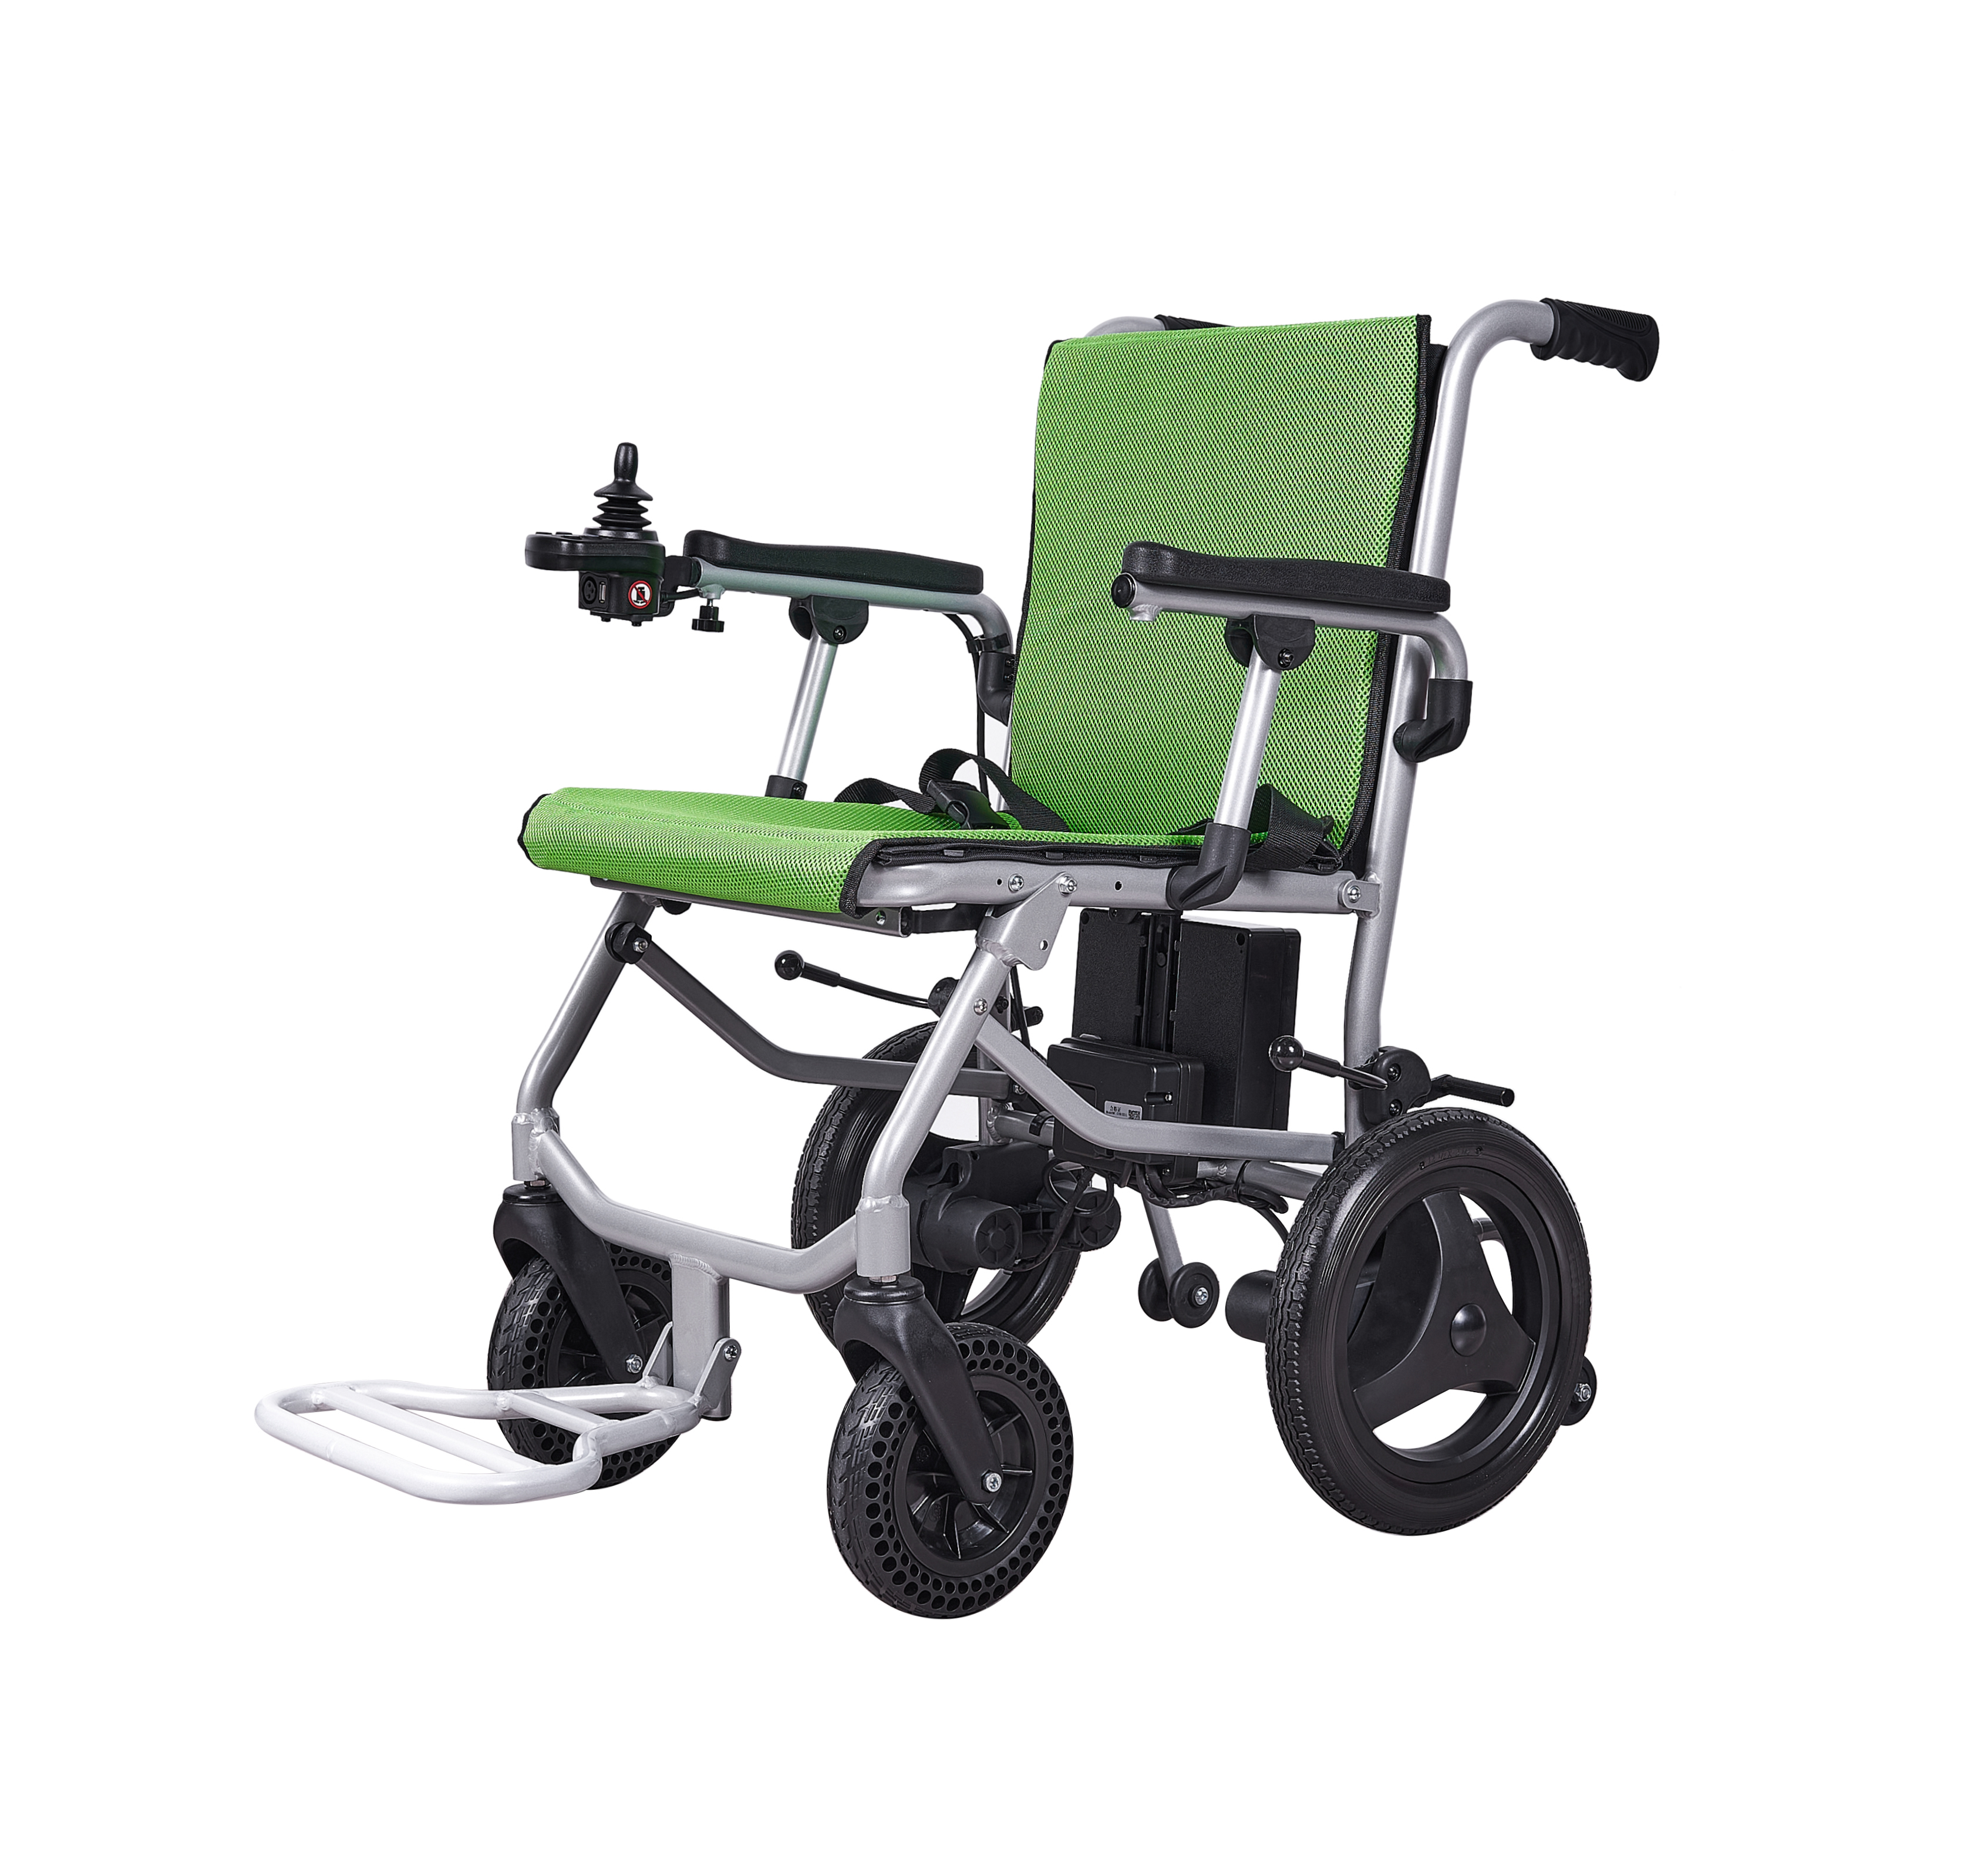 12 Inch Motor Rear Wheel Electric Folding Cerebral Palsy Portable Adult Wheelchair